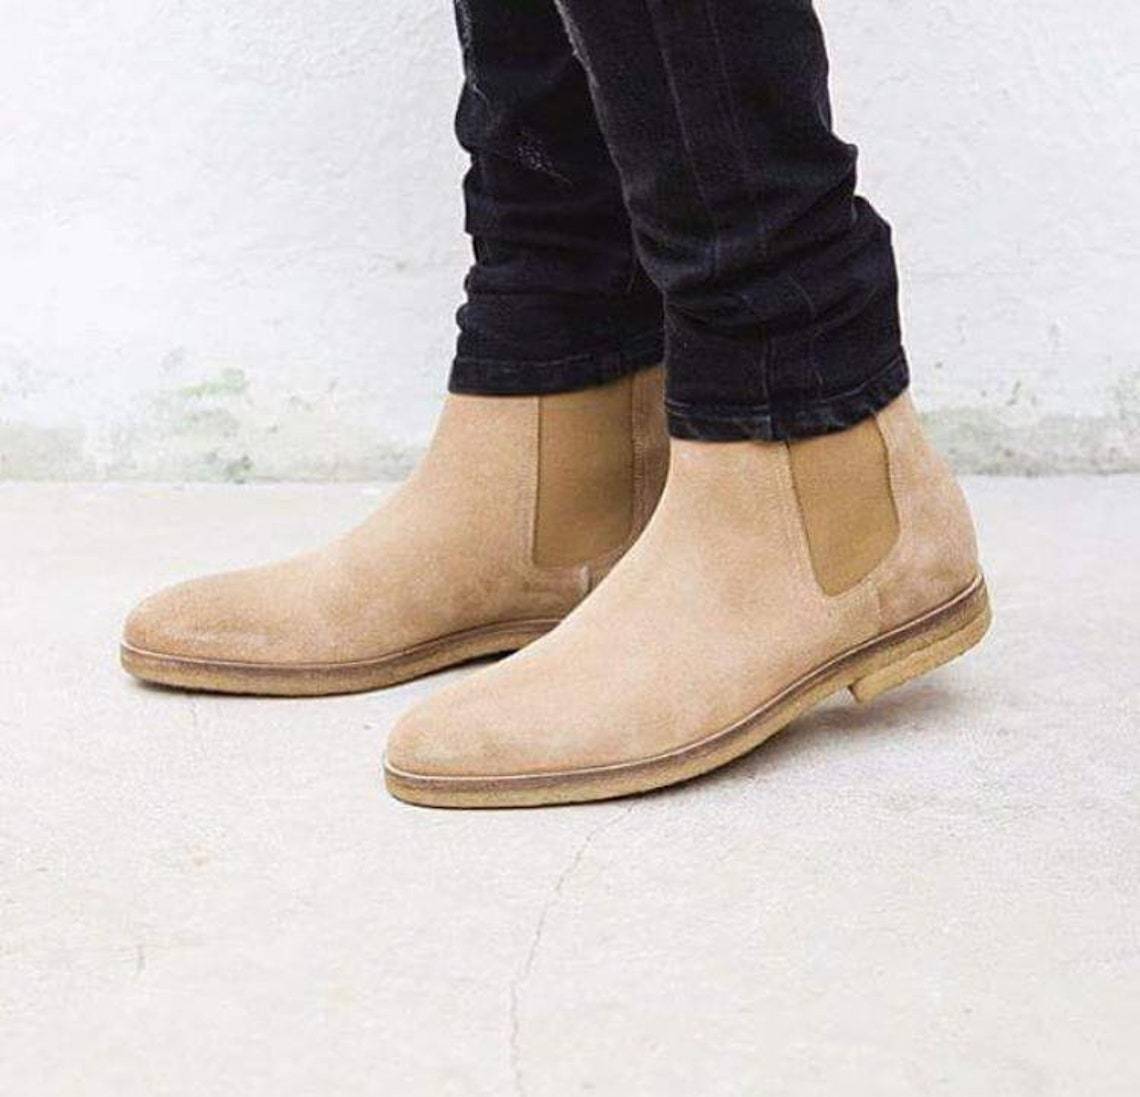 New Pure Handmade Beige Suede Leather Chelsea Boot For Men's - Men